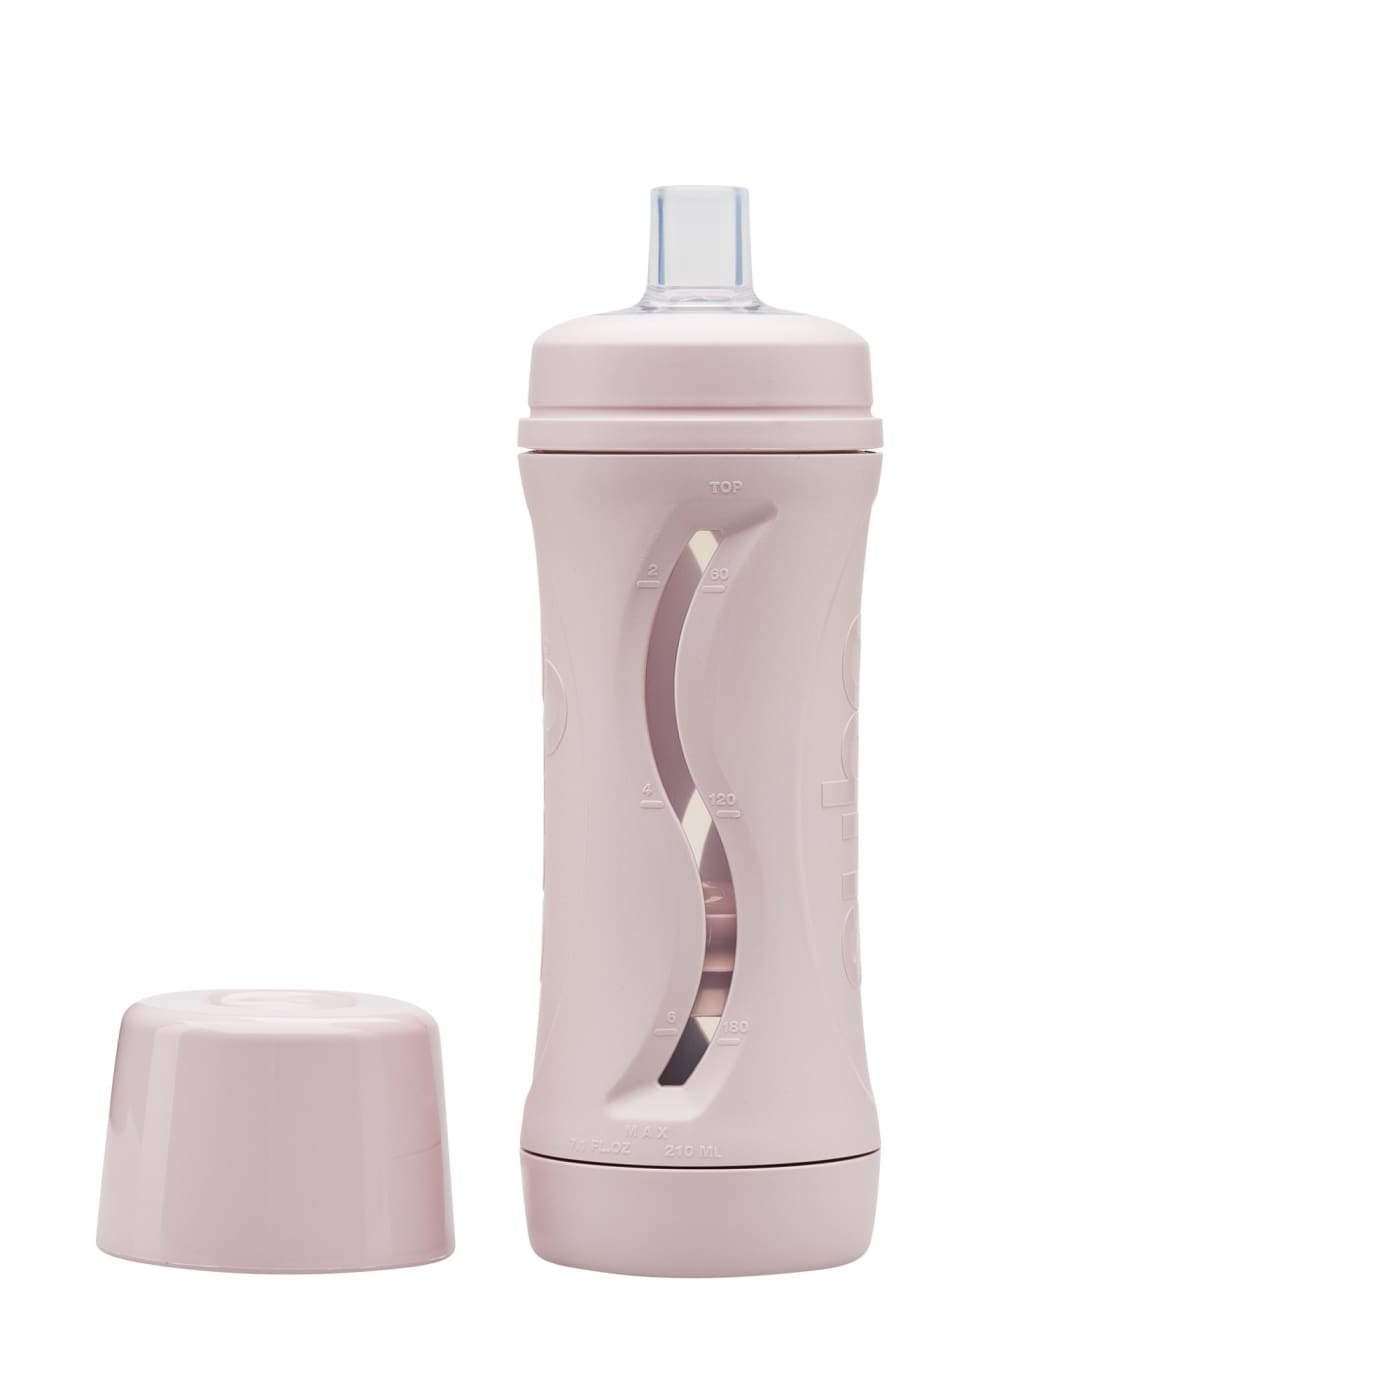 Subo The Food Bottle - Musk - Musk - NURSING & FEEDING - CONTAINERS/FEEDERS